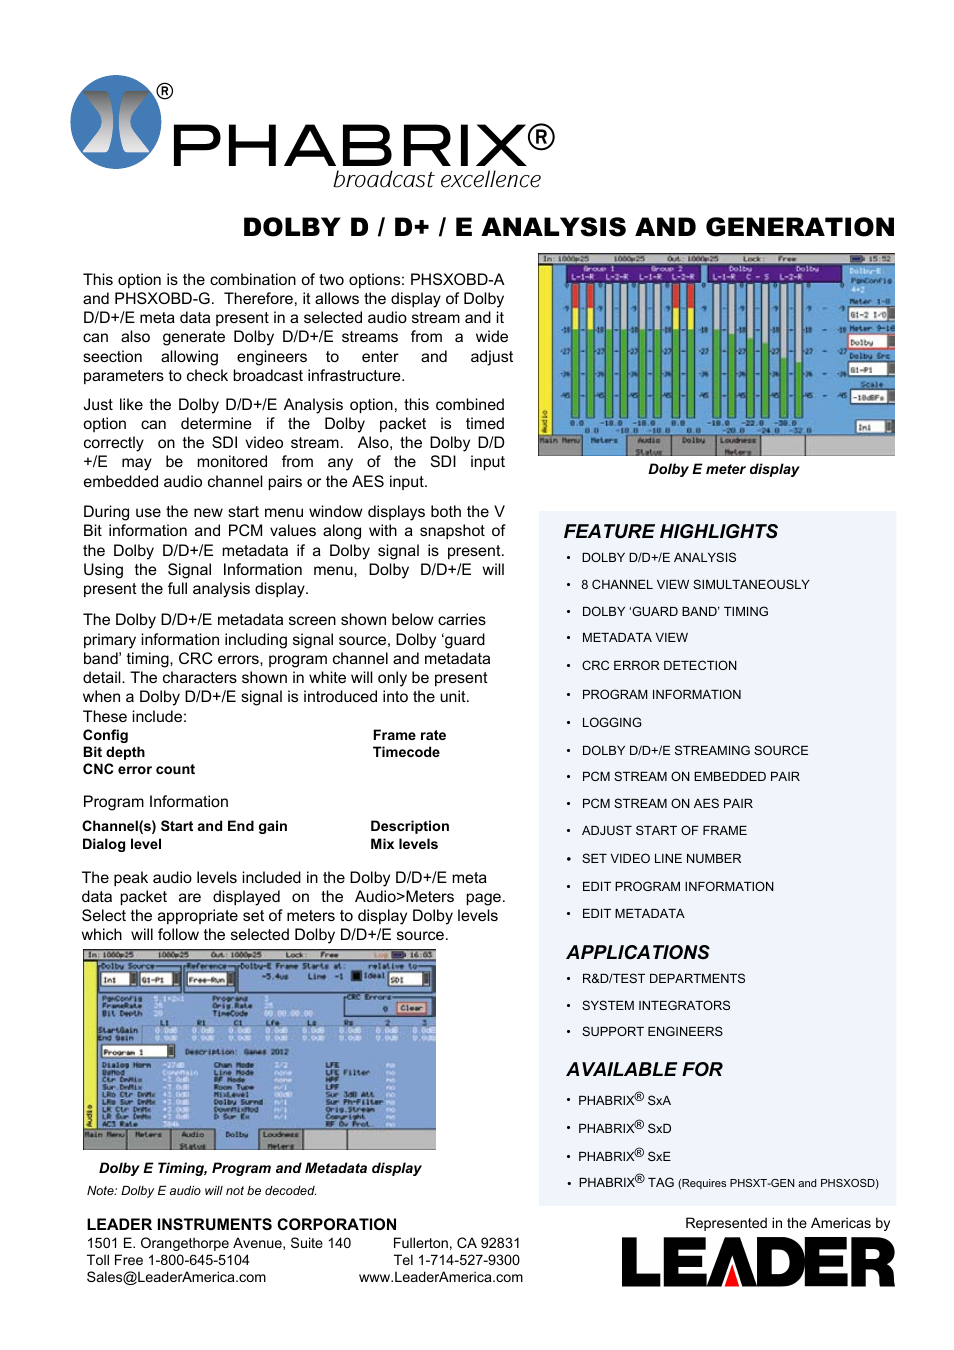 PHABRIX DOLBY D_D+_E ANALYSIS AND GENERATION